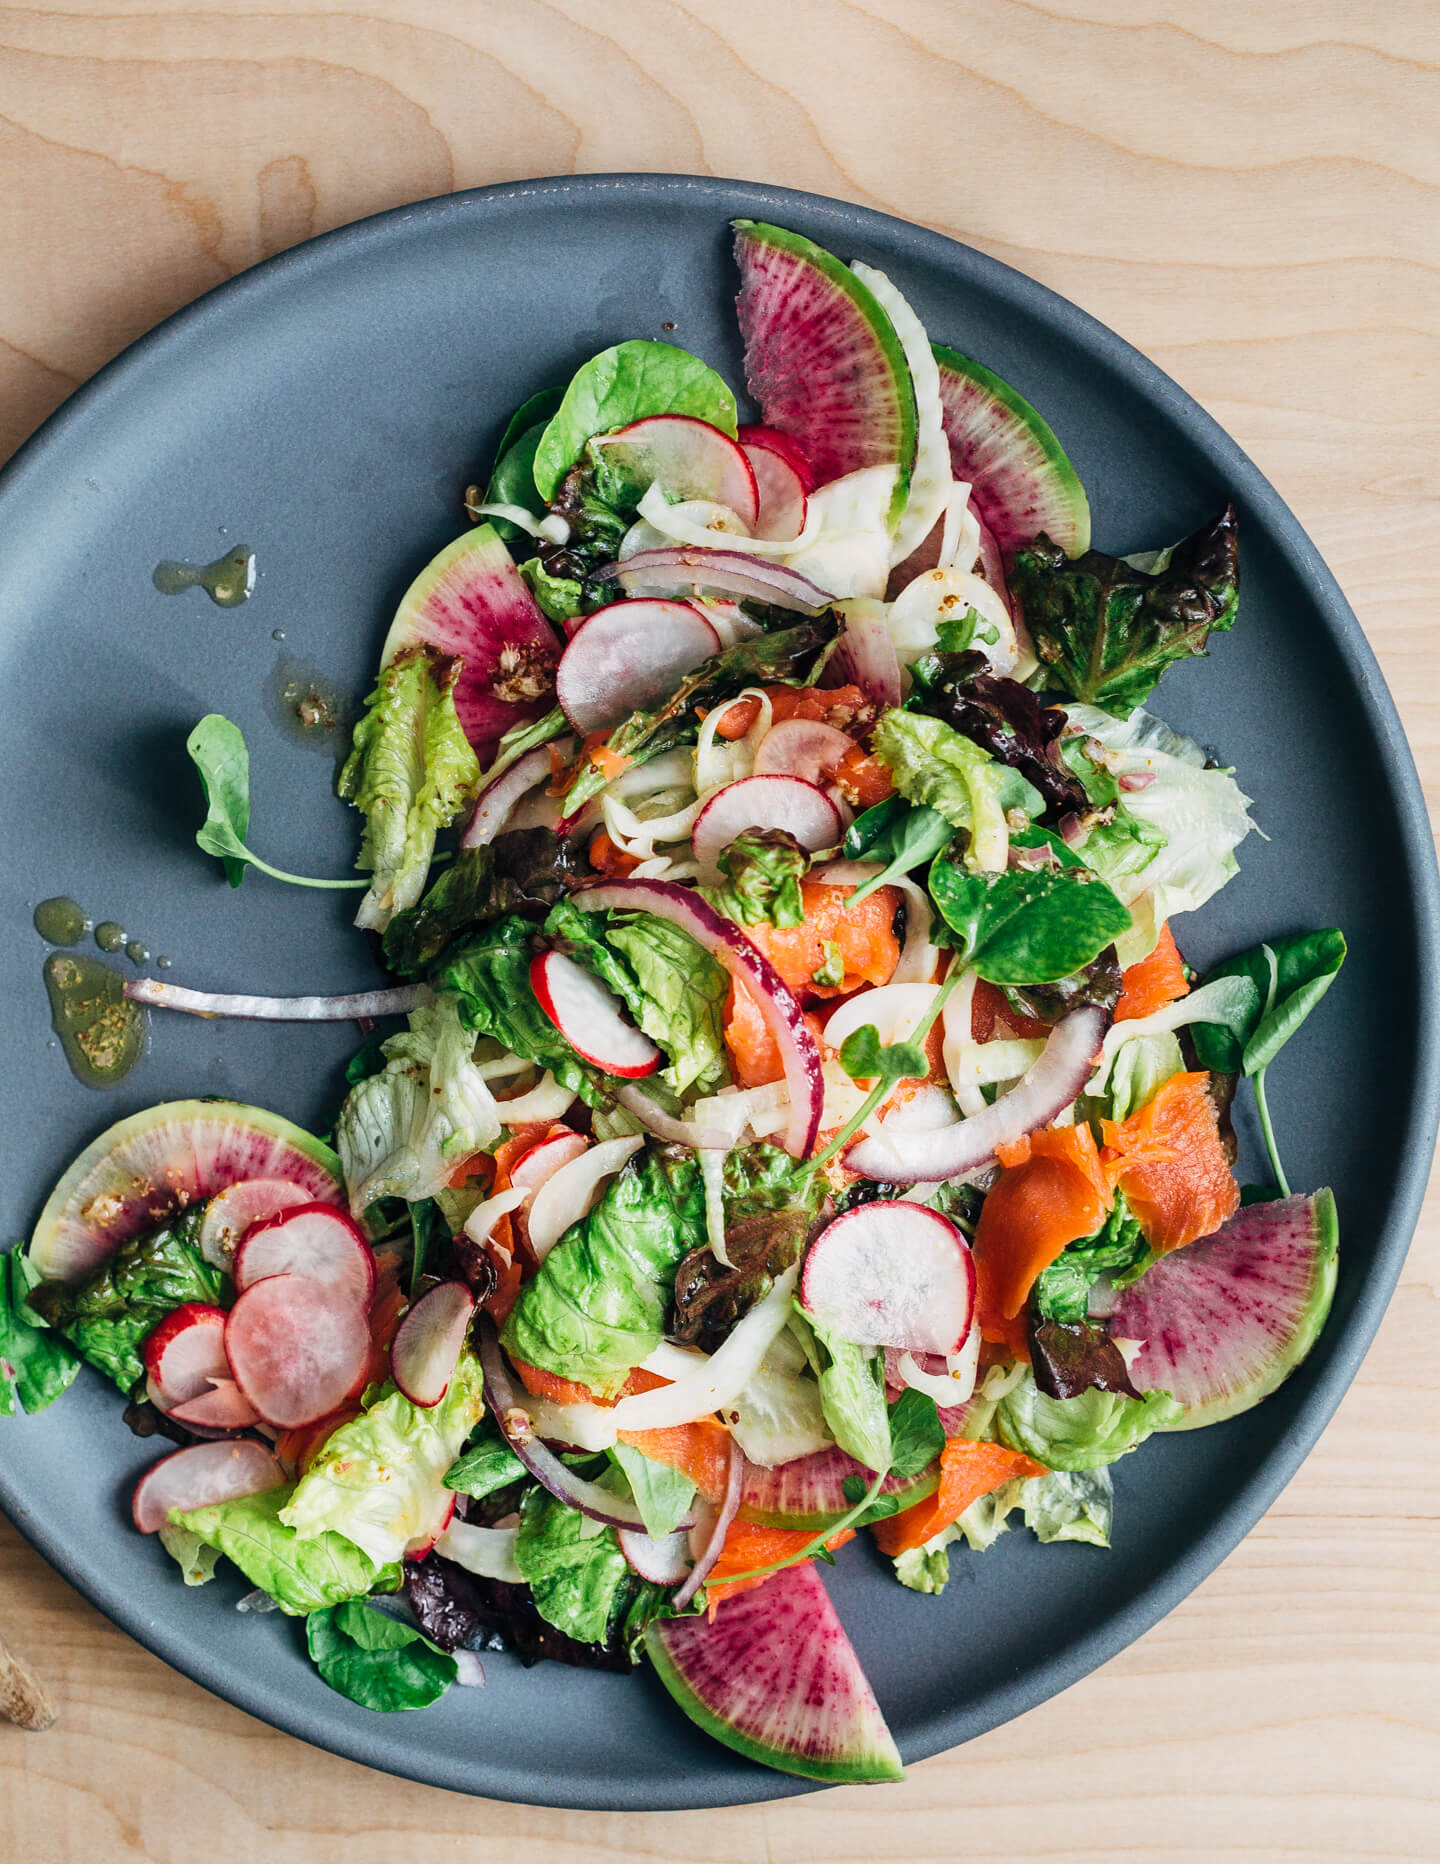 A colorful smoked salmon salad to herald spring! Smoked salmon and delicate lettuces are layered with thinly sliced fennel, radish, and red onion, and tossed with an assertive Dijon and horseradish vinaigrette. 